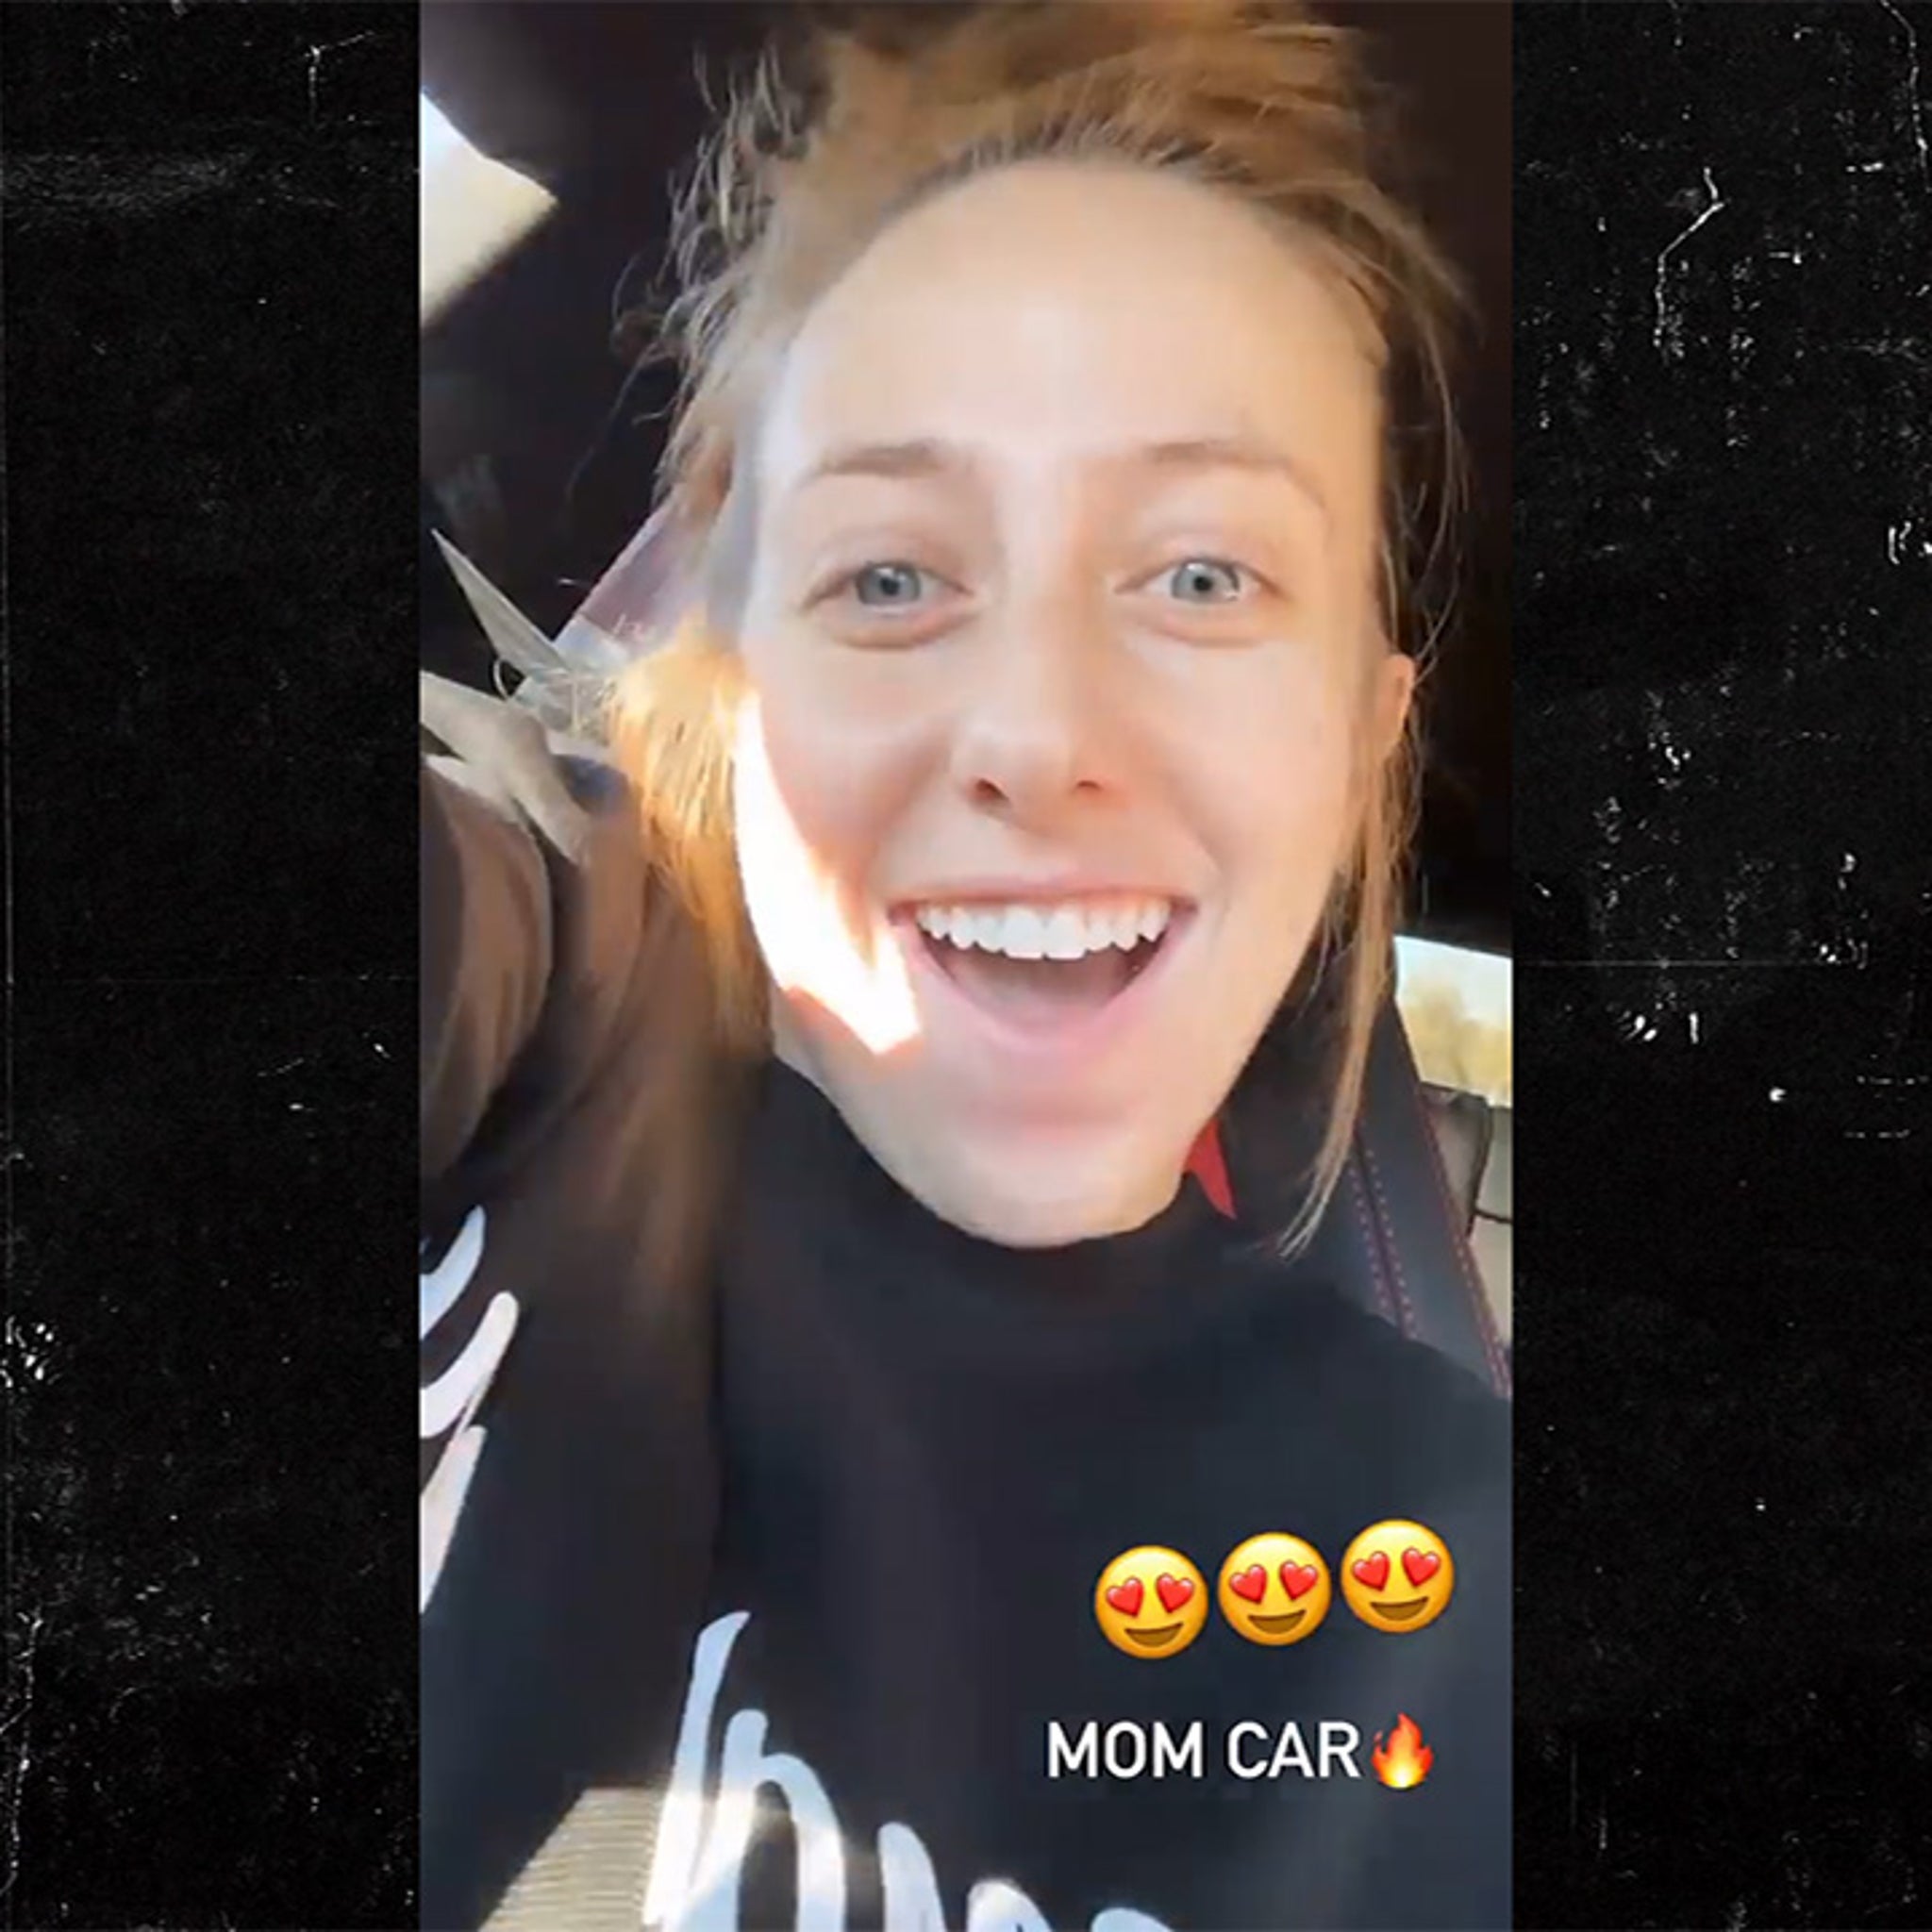 Patrick Mahomes Gifts Fiancee Brittany Matthews With New Ride, '#MomCar!